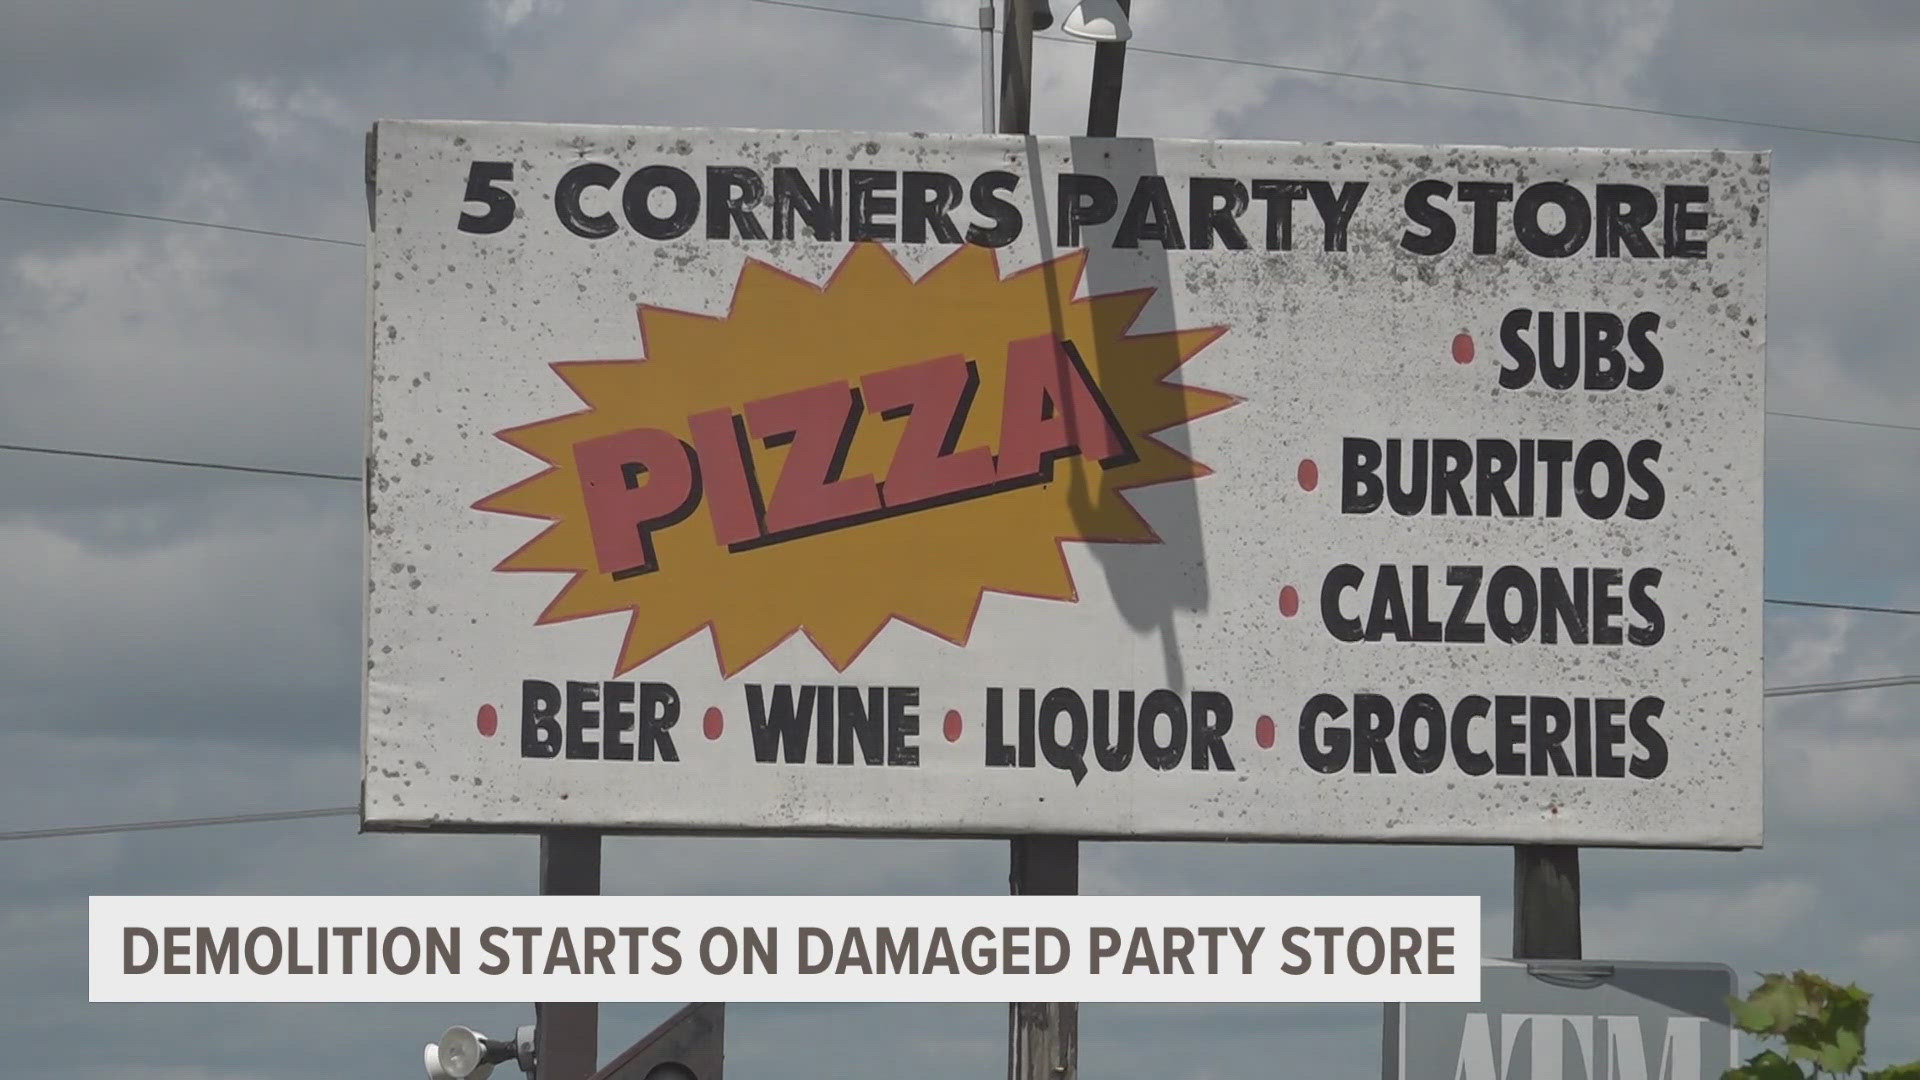 It's the end of an era for the Five Corners Party Store near Greenville. 
This week, work began to tear the store down.